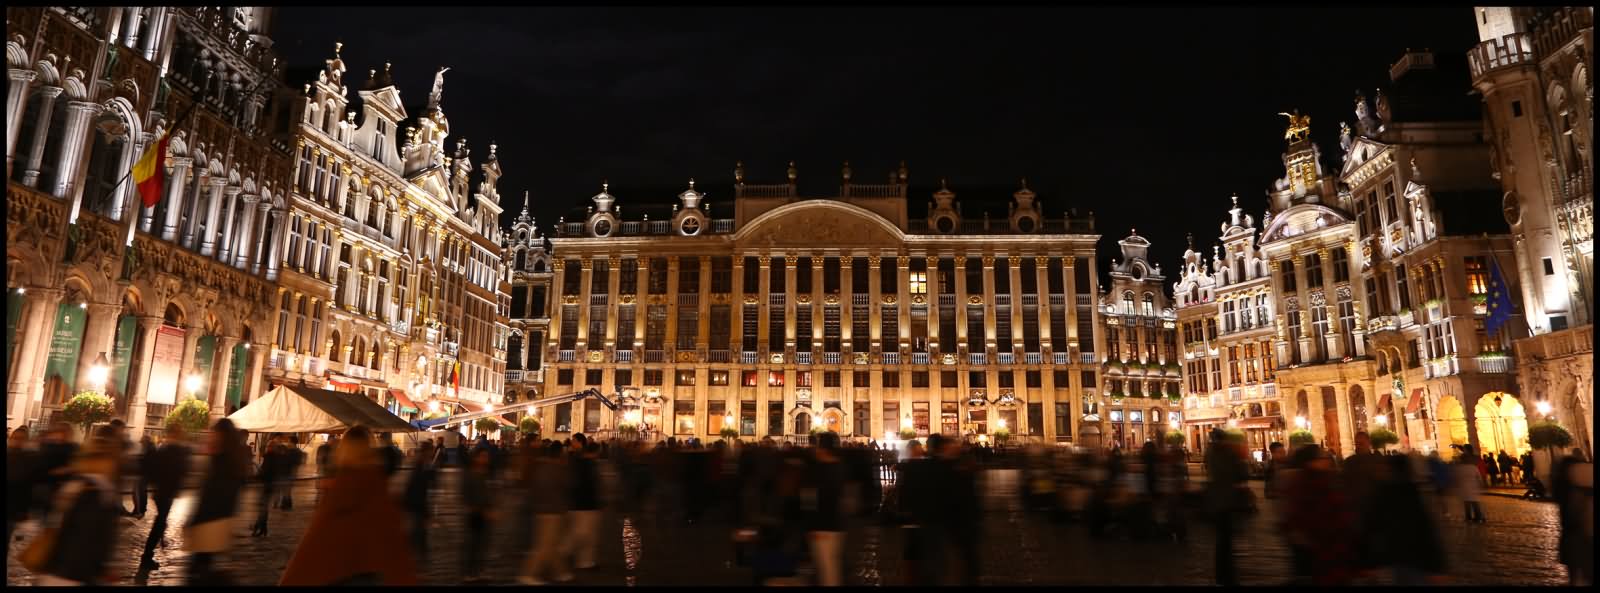 The Grand Place In Brussels At Night